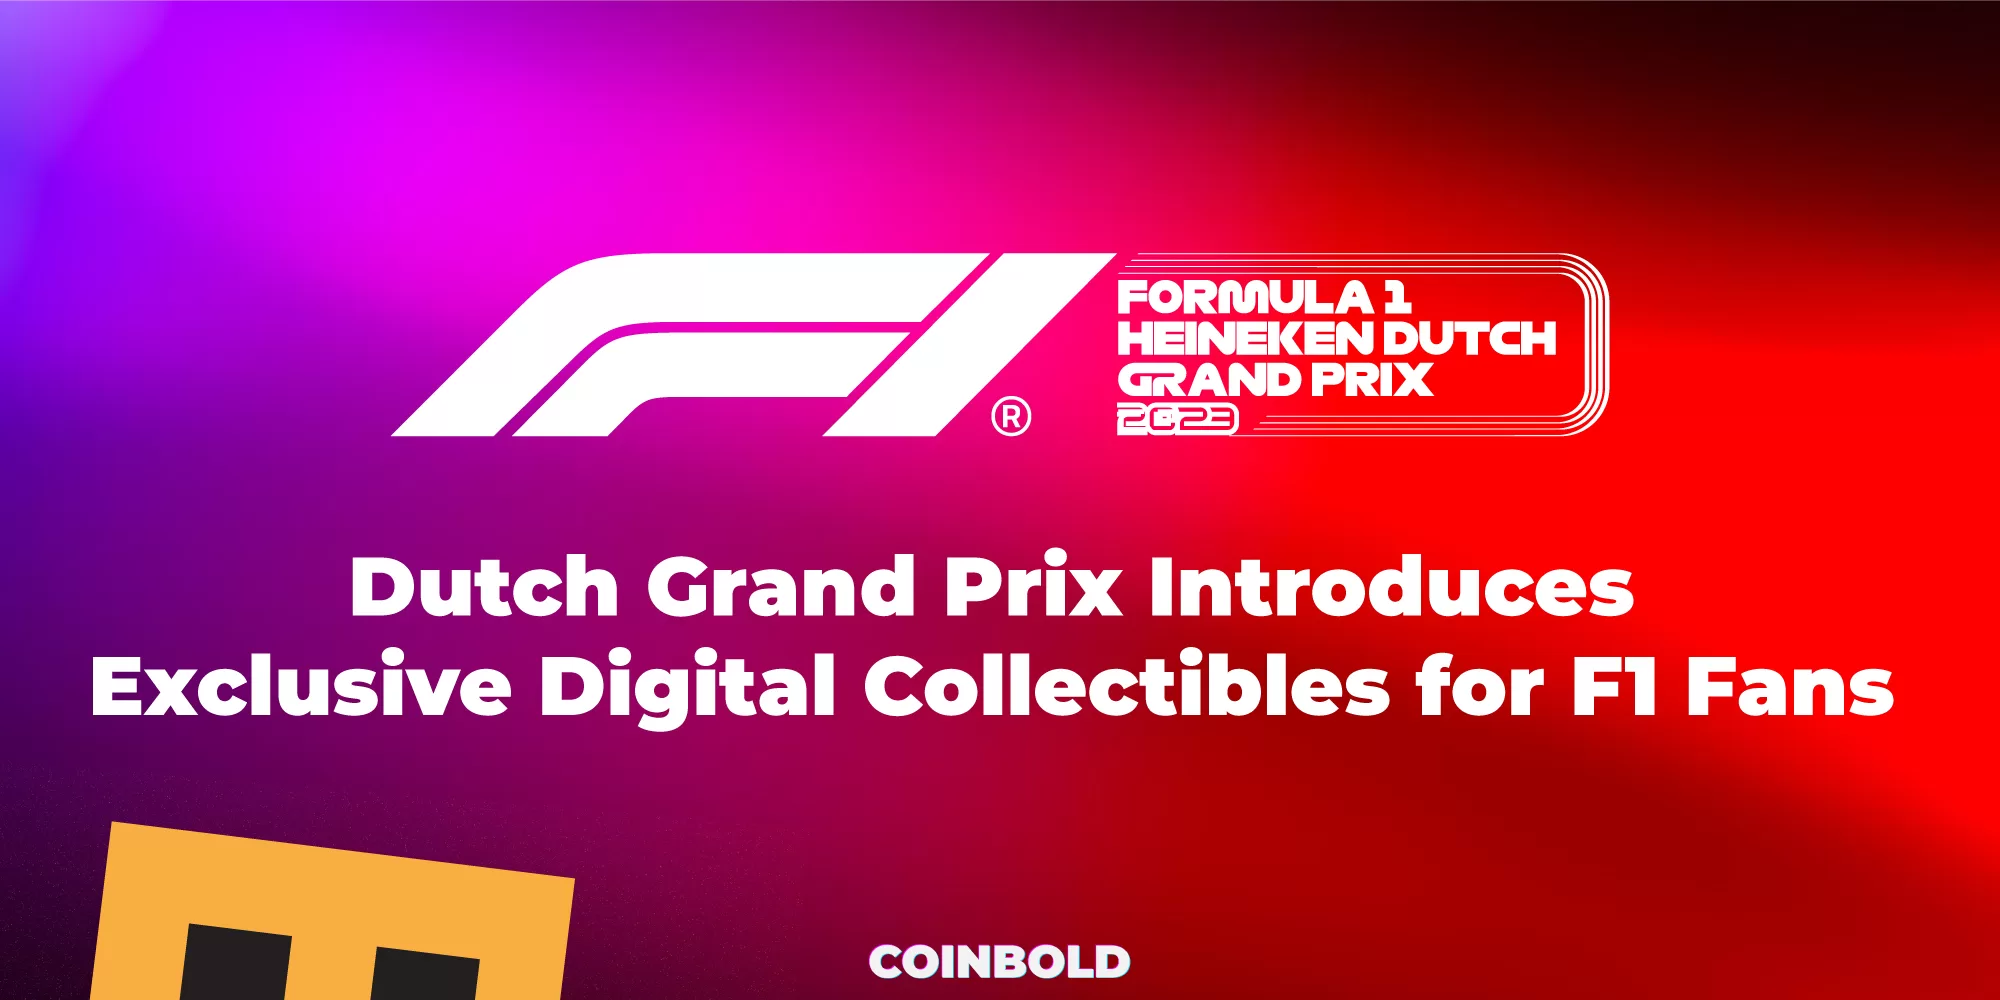 Dutch Grand Prix Introduces Exclusive Digital Collectibles for F1 Fans